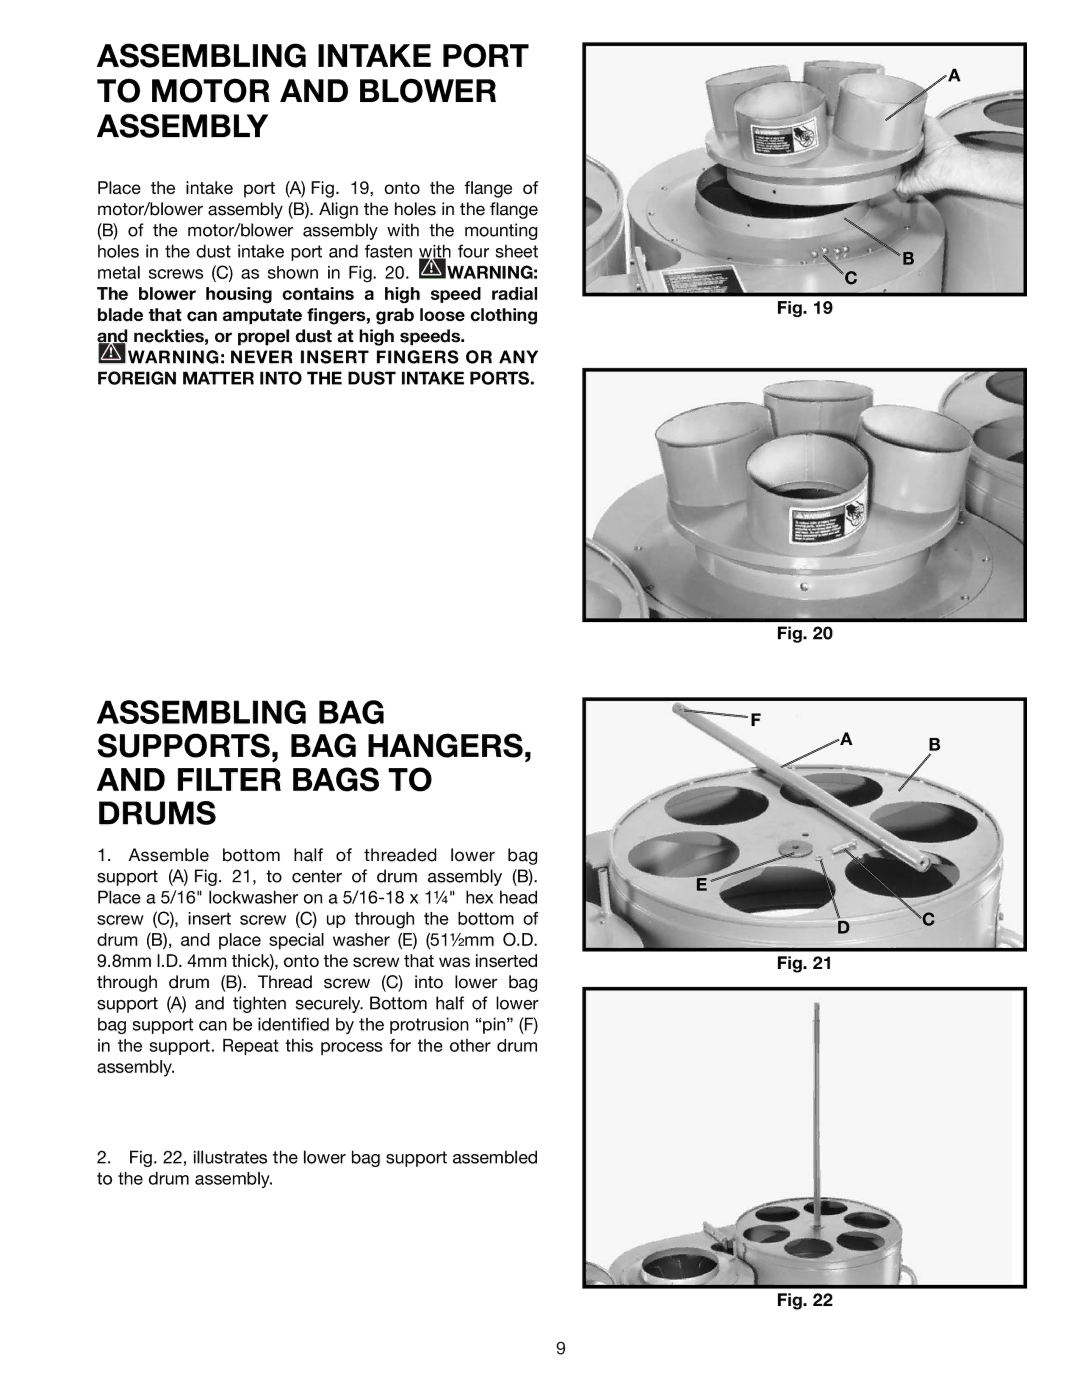 Delta 50-866, 50-861 instruction manual Assembling Intake Port to Motor and Blower Assembly 